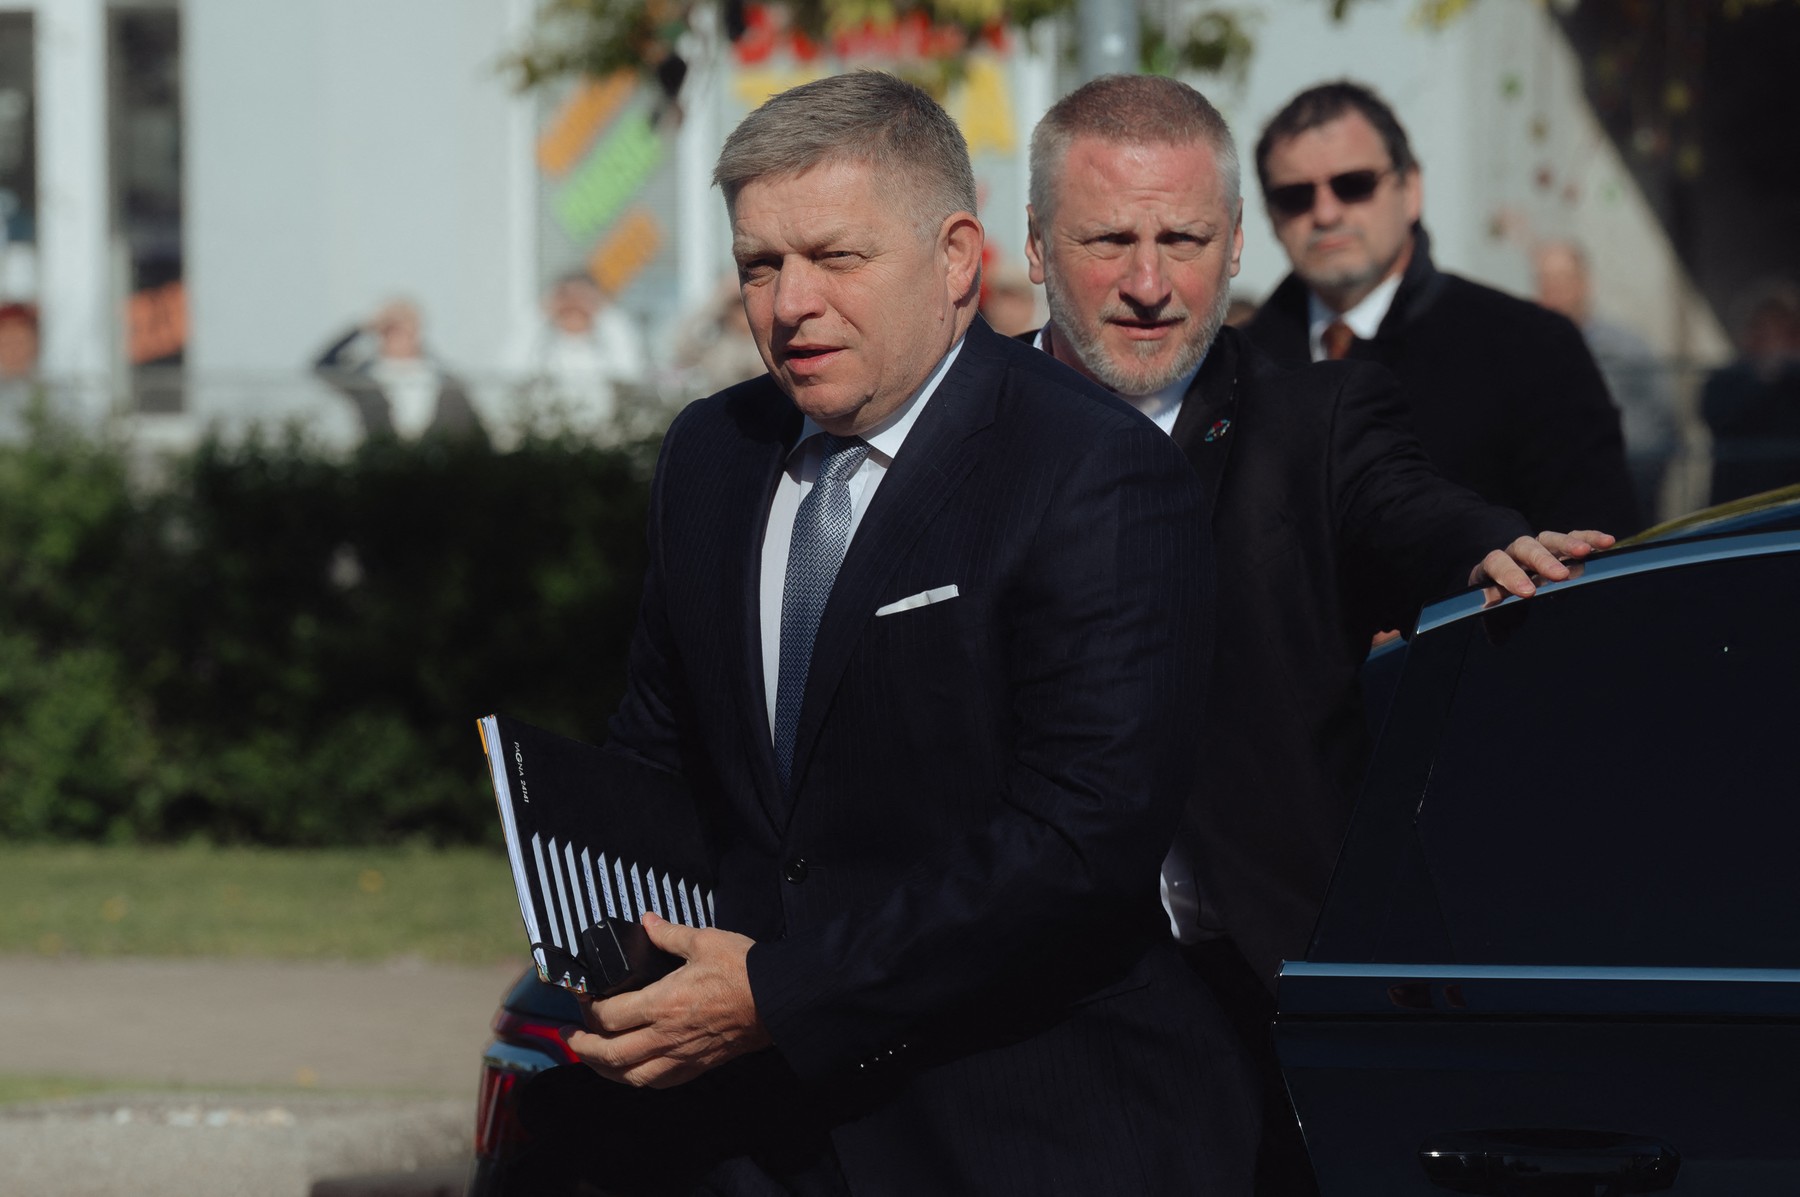 MICHALOVCE, SLOVAKIA - APRIL 11: Robert Fico, Prime Minister of Slovakia arrives at the town hall as members of the Slovak and Ukrainian governments meet to discuss cross-border cooperation projects, transport links and energy cooperation in Michalovce, Slovakia on April 11, 2024. The ministers also discussed the defence industry, cooperation in demining Ukrainian territories and logistical support. The reconstruction of Ukraine was also one of the main topics of the meeting. The ministers also discussed agricultural and education issues. A joint press statement by the Prime Minister of the Slovak Republic, Robert Fico, and the Prime Minister of Ukraine, Denys Shmyhal, is scheduled for around 13.30 on the day. Robert Nemeti / Anadolu/ABACAPRESS.COM,Image: 864013903, License: Rights-managed, Restrictions: , Model Release: no, Credit line: AA/ABACA / Abaca Press / Profimedia